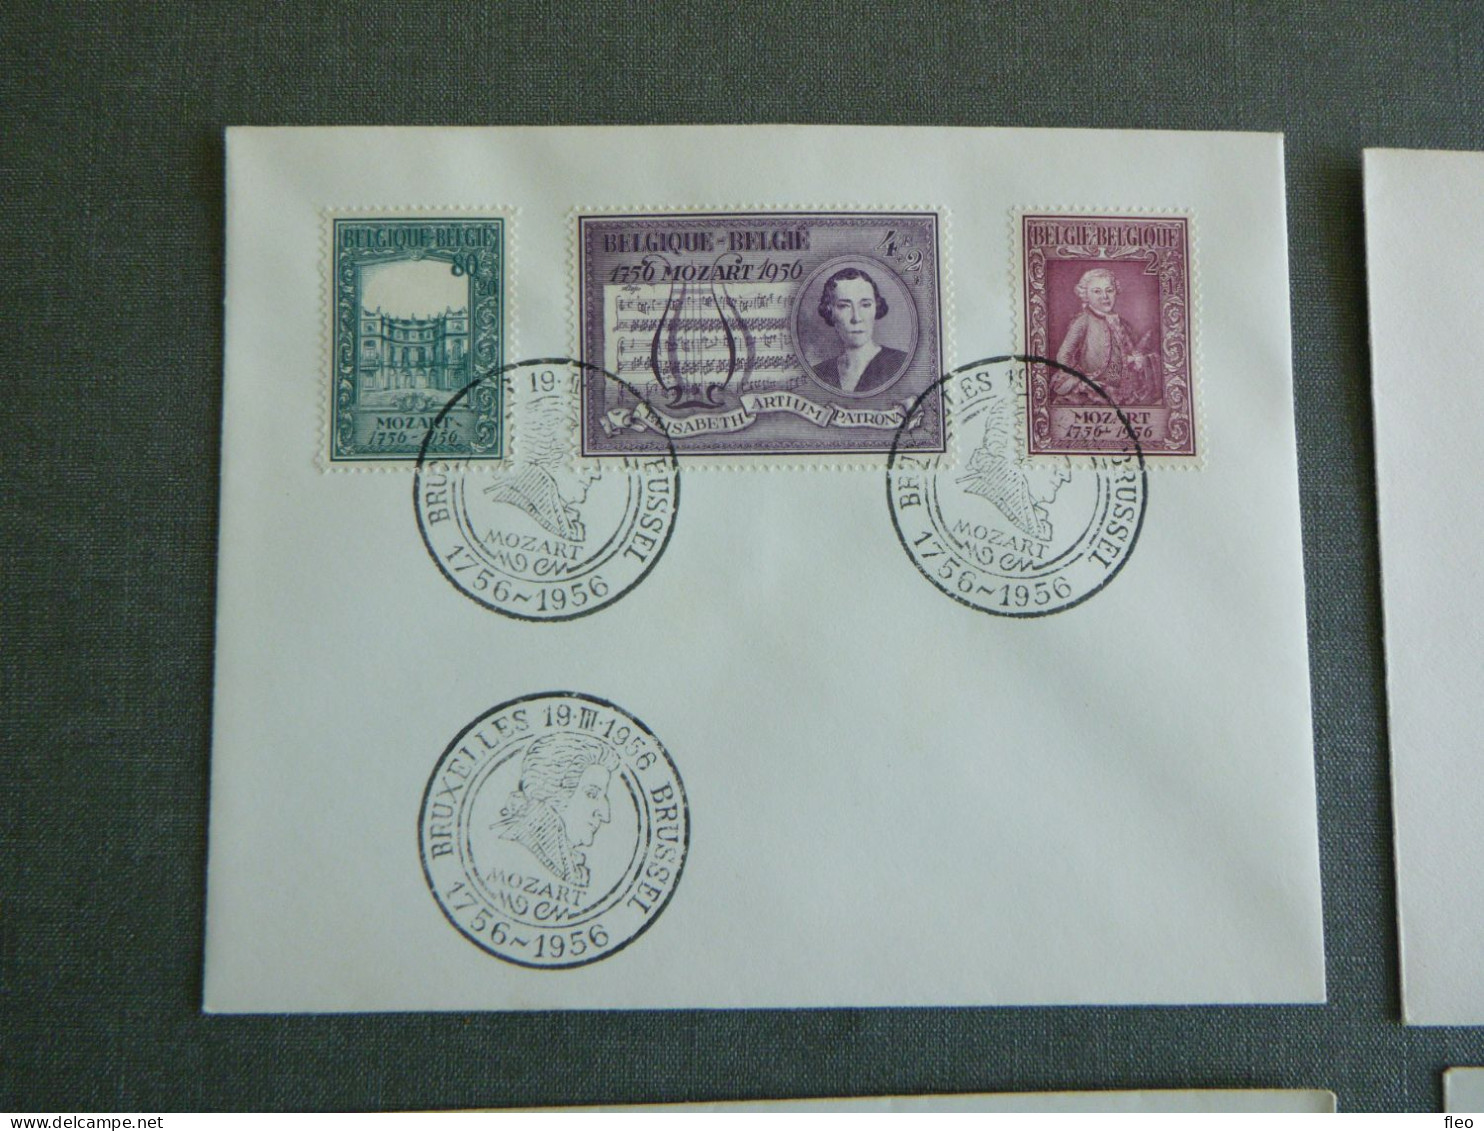 1956 987/989 & 990 & 994/995 & 996 & 997 & 998/1004 FDC's - 1951-1960